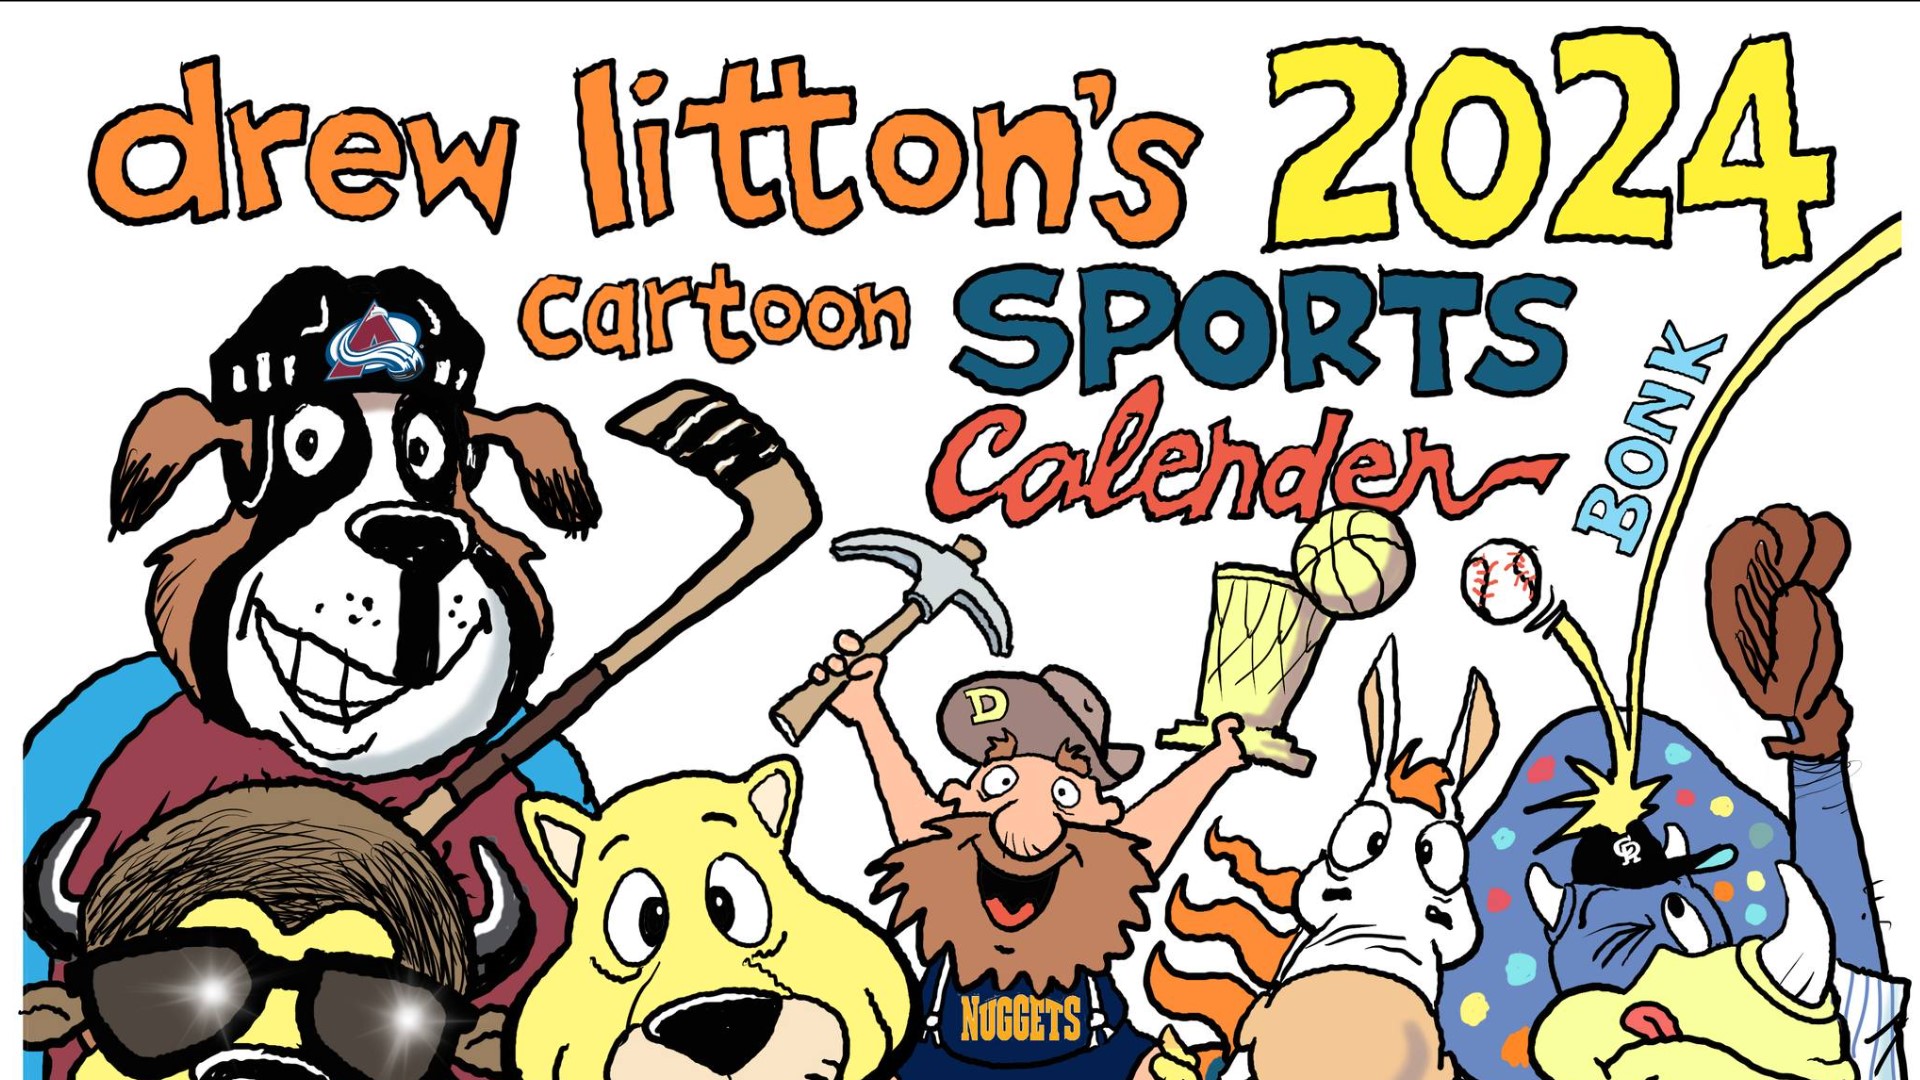 9Toonist Drew Litton has a new sports calendar as his storied career reaches a milestone 42nd year in 2024.